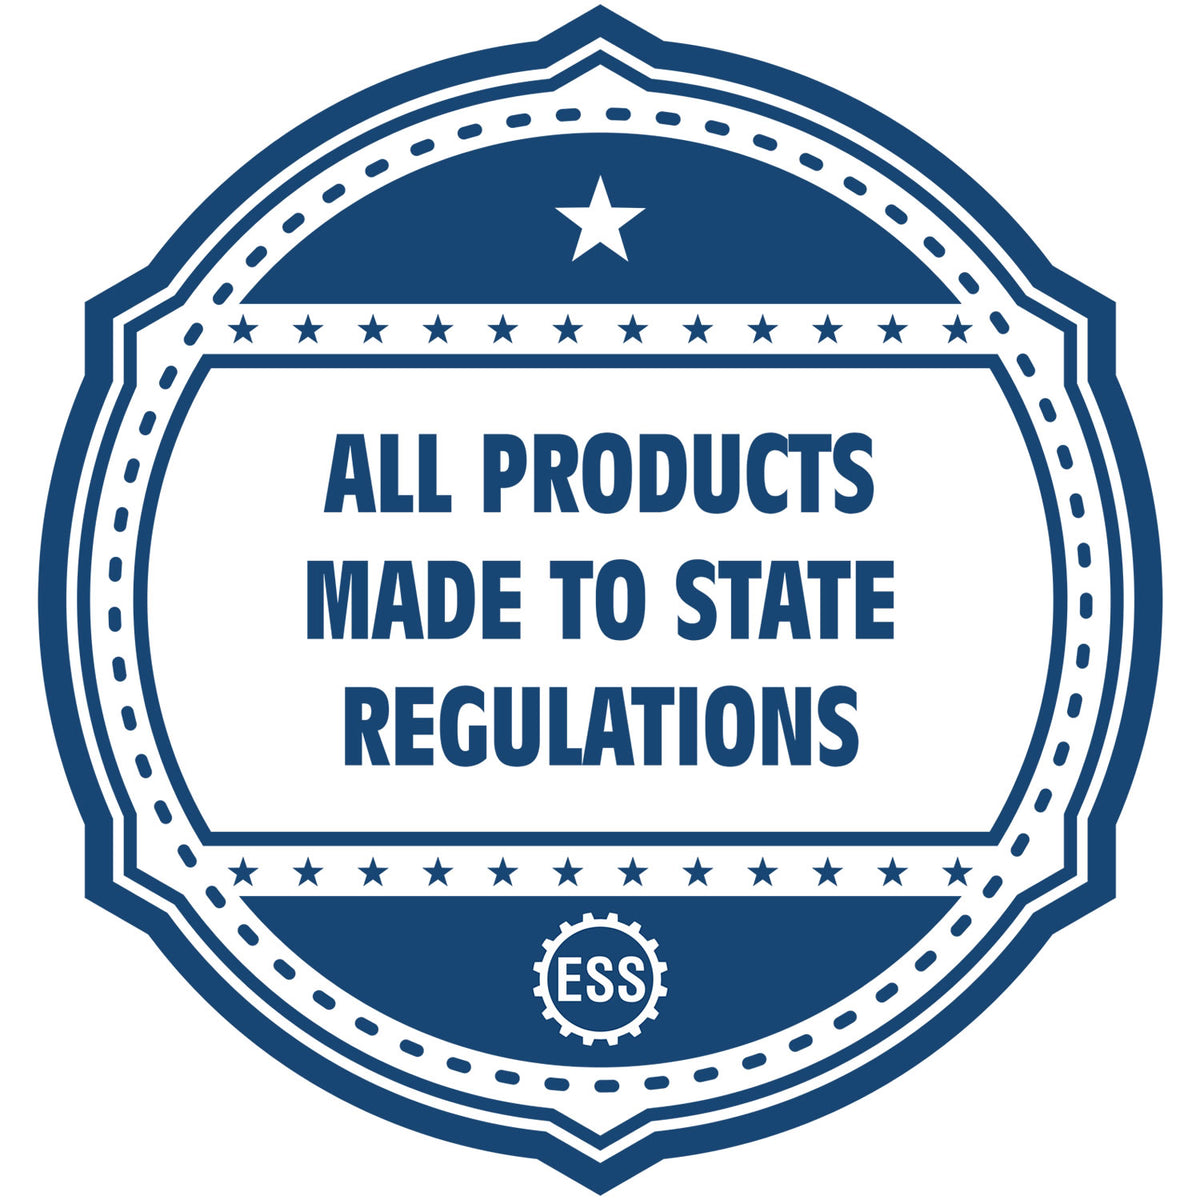 A blue icon or badge for the State of Texas Extended Long Reach Geologist Seal showing that this product is made in compliance with state regulations.